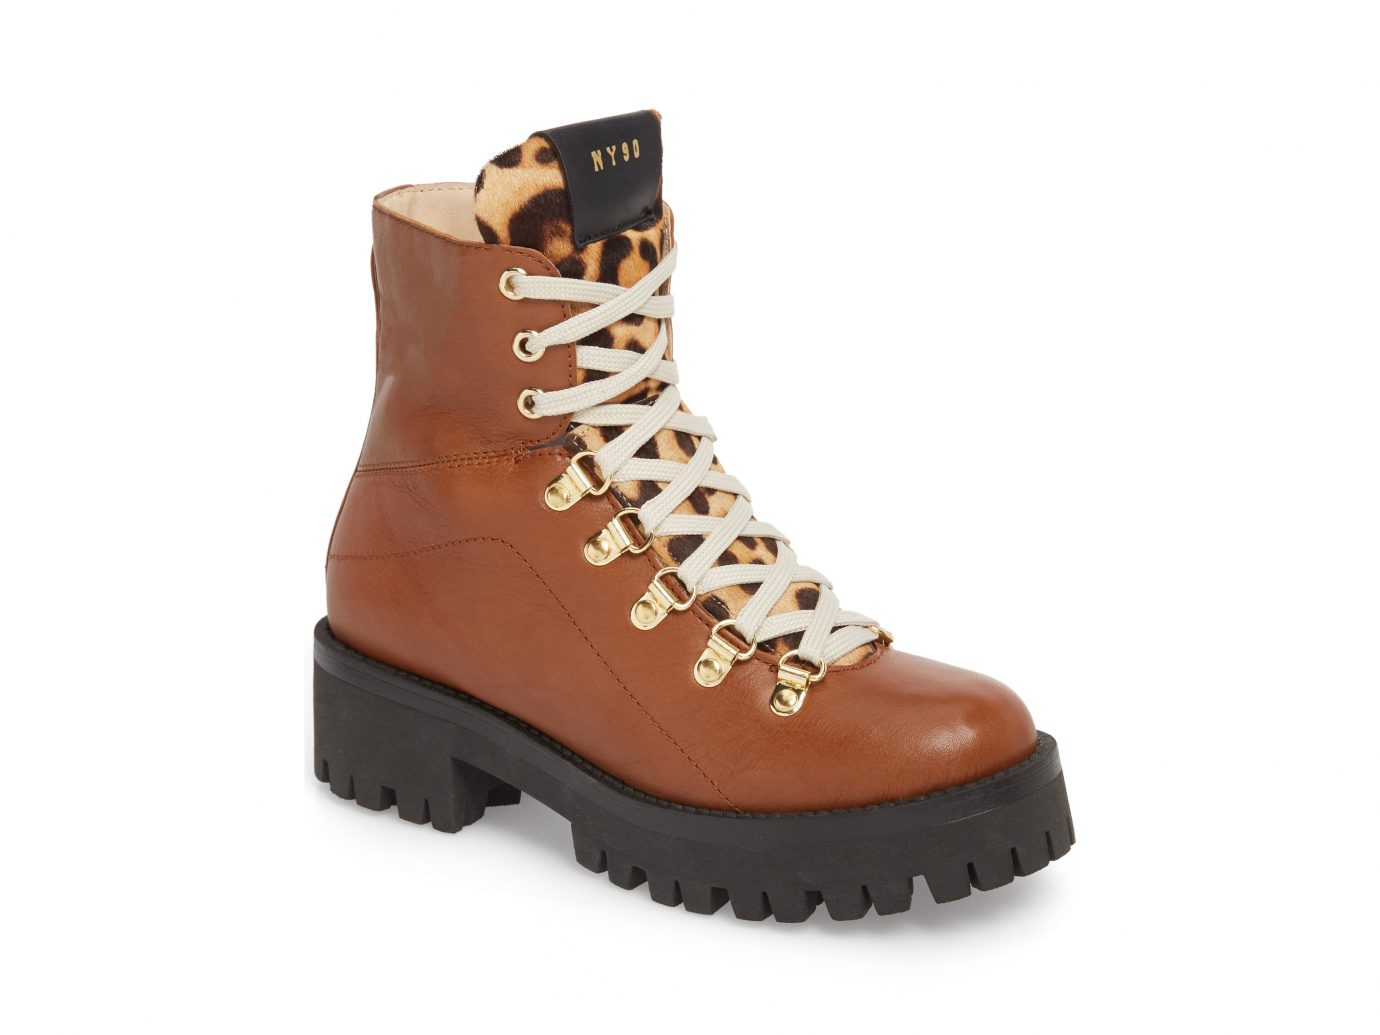 Hiking boots: Steve Madden Boom Hiker Boot with Genuine Calf Hair